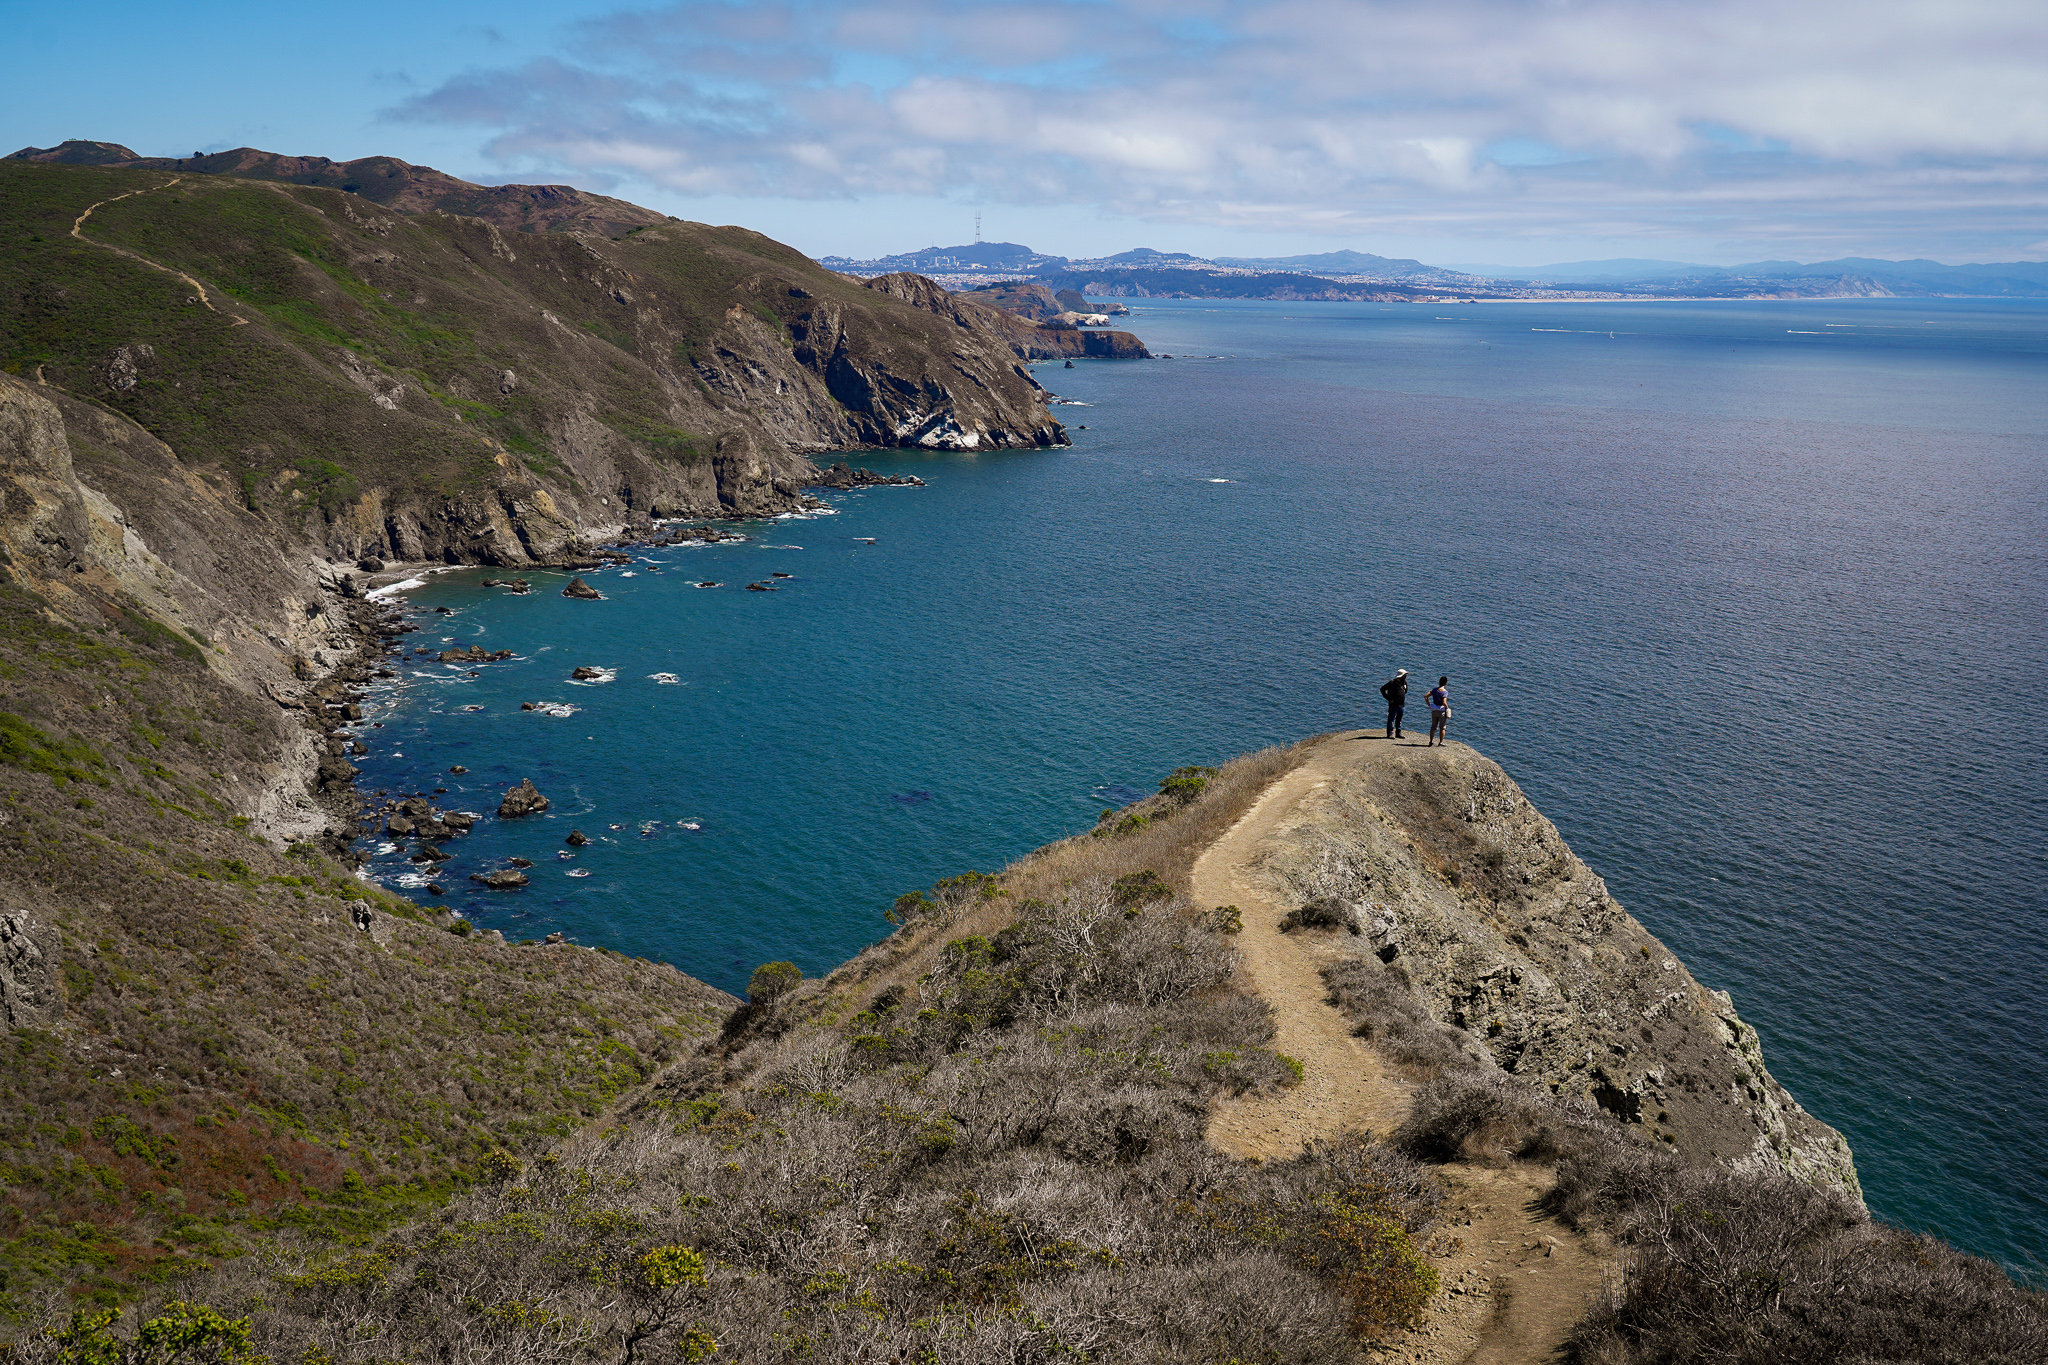 hikers on the Coastal Trail to Pirates Cove in Marin Headlands